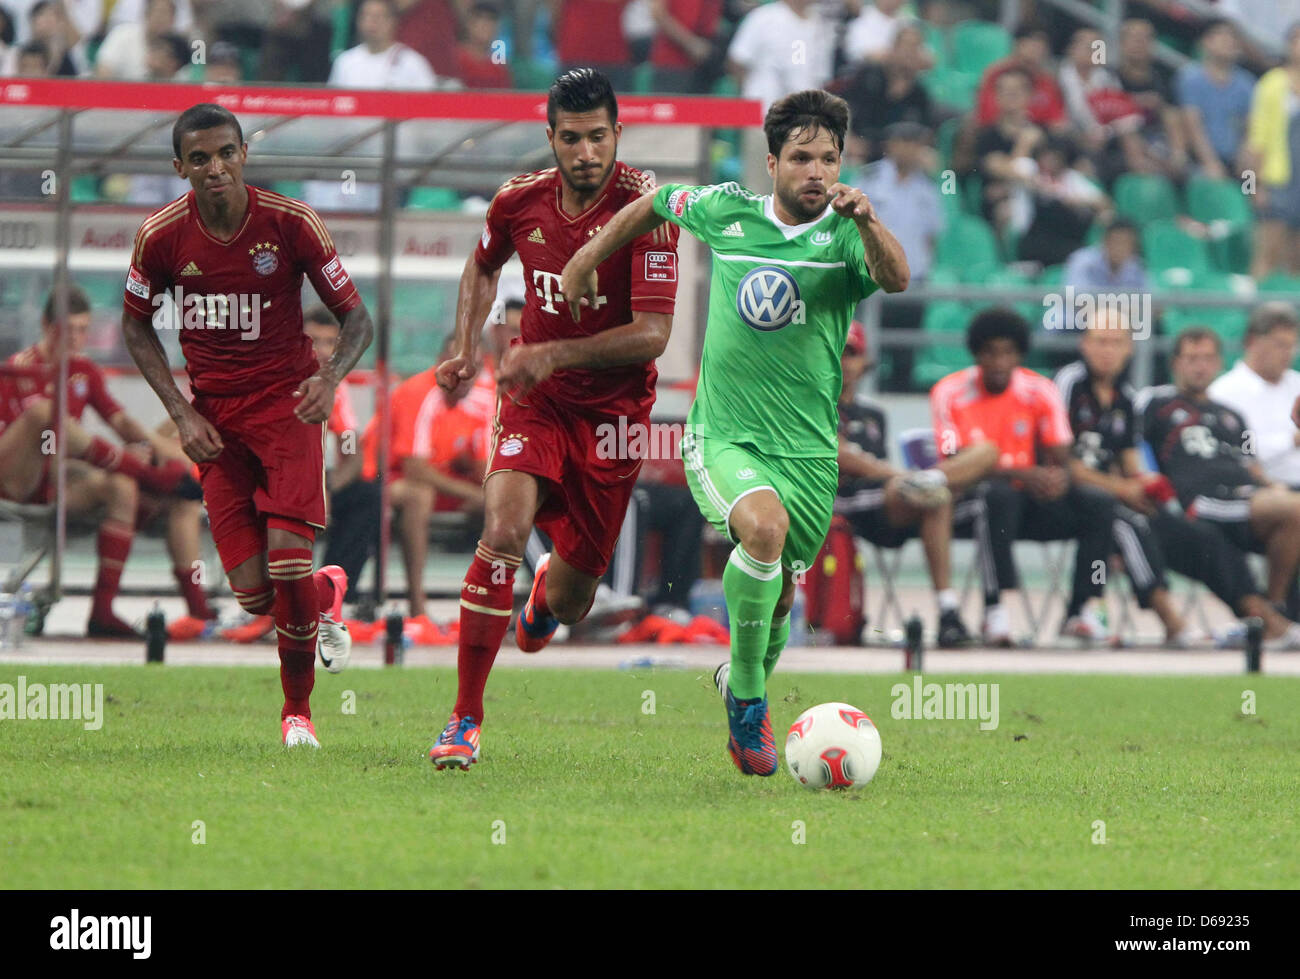 Wolfsburg's Diego (R) vies for the ball with Munich's Emre Can (M) and Luiz Gustavo during the test match of the German Bundesliga soccer clubs VfL Wolfsburg vs FC Bayern Munich in Guangzhou, China, 26 July 2012. Photo: Roland Hermstein Stock Photo